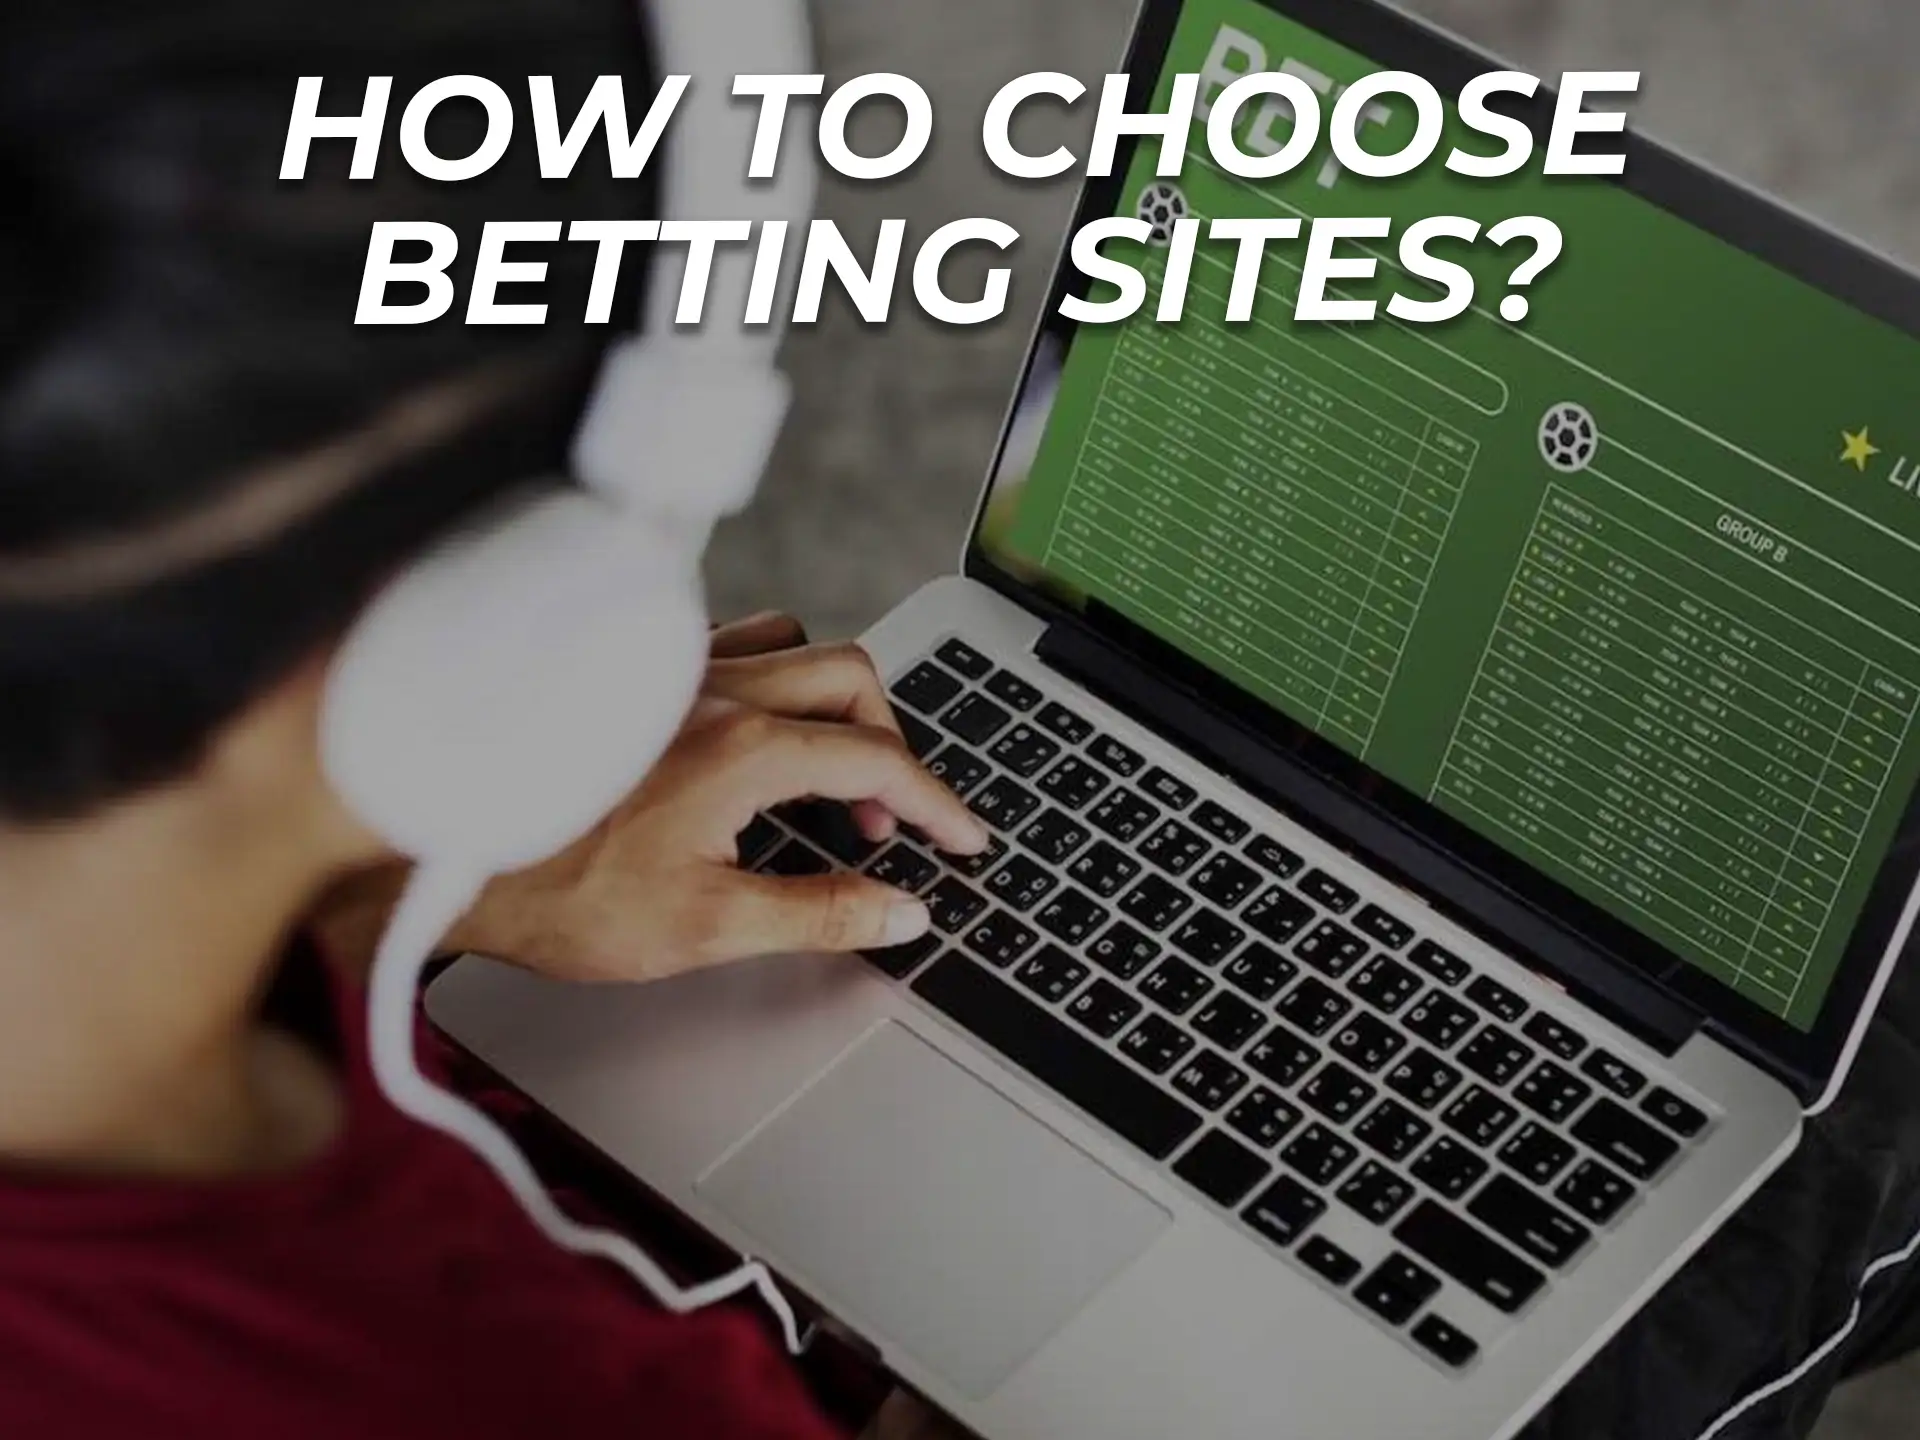 Use the guide to choose the right sports betting site.